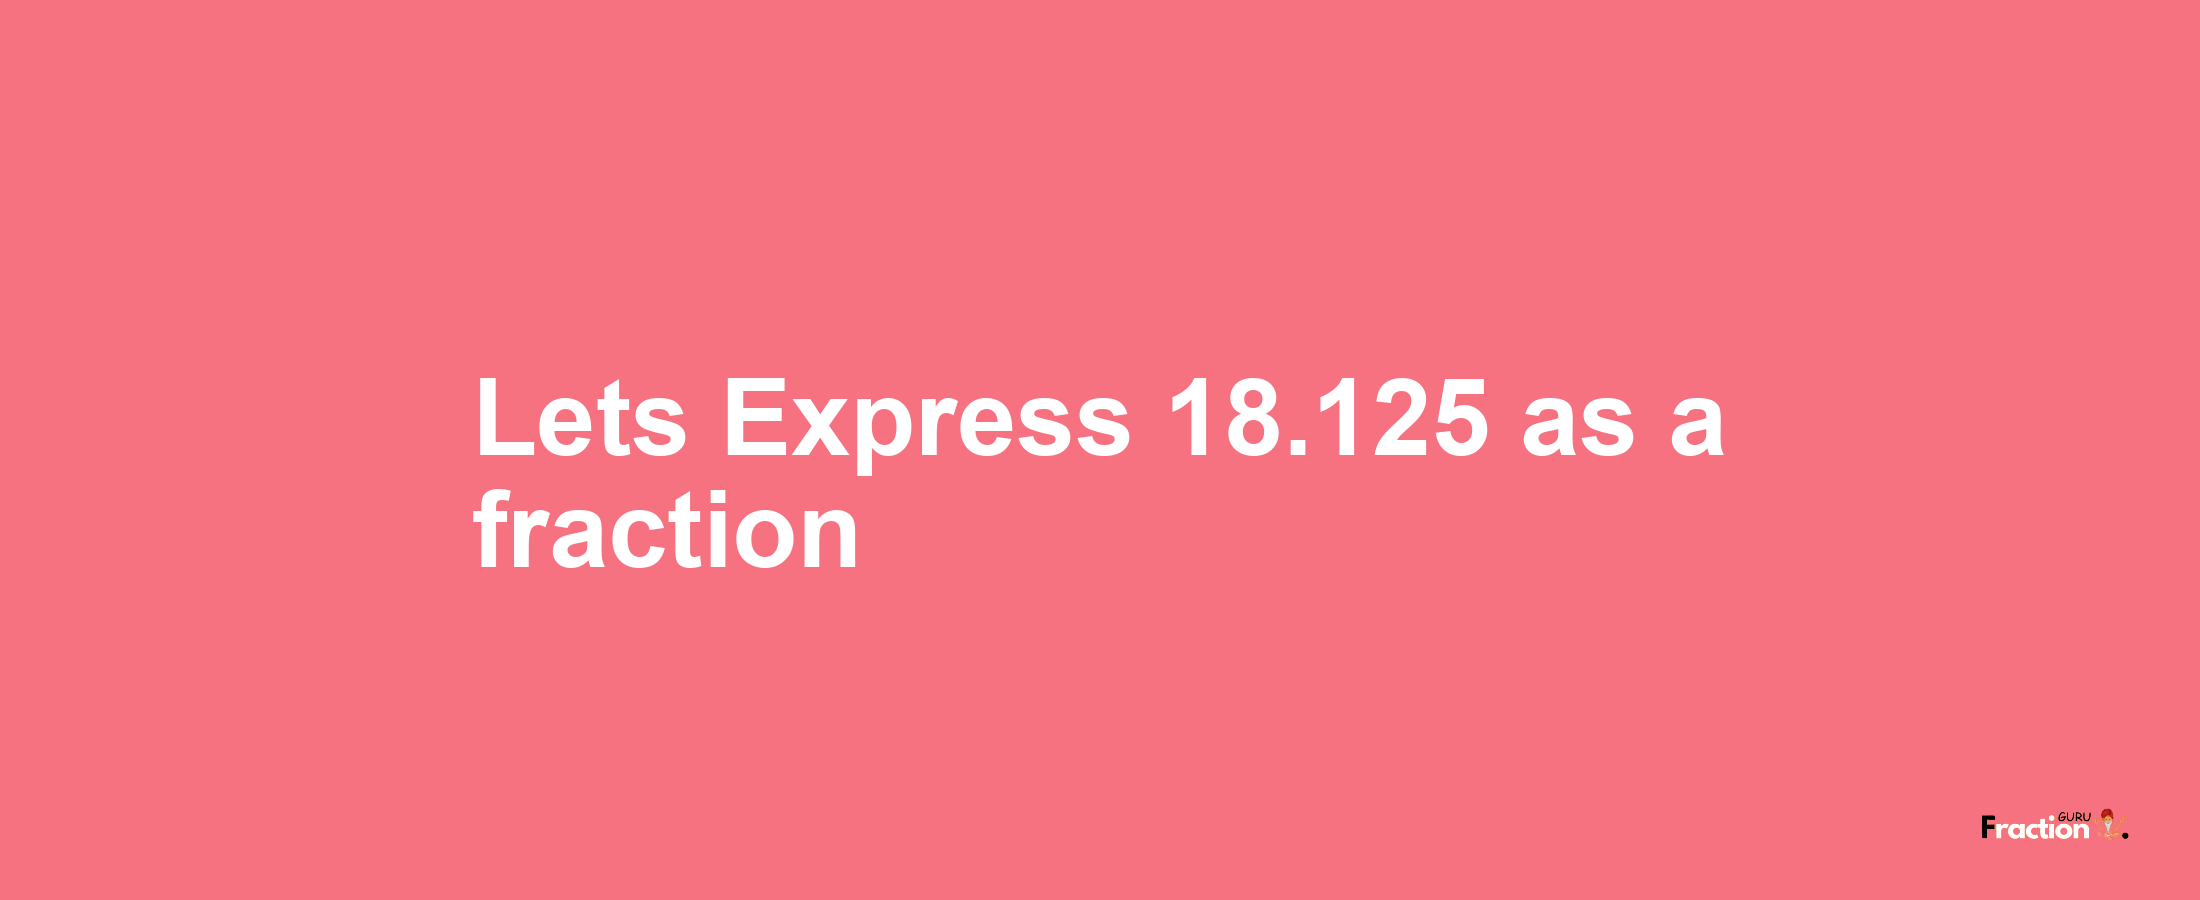 Lets Express 18.125 as afraction